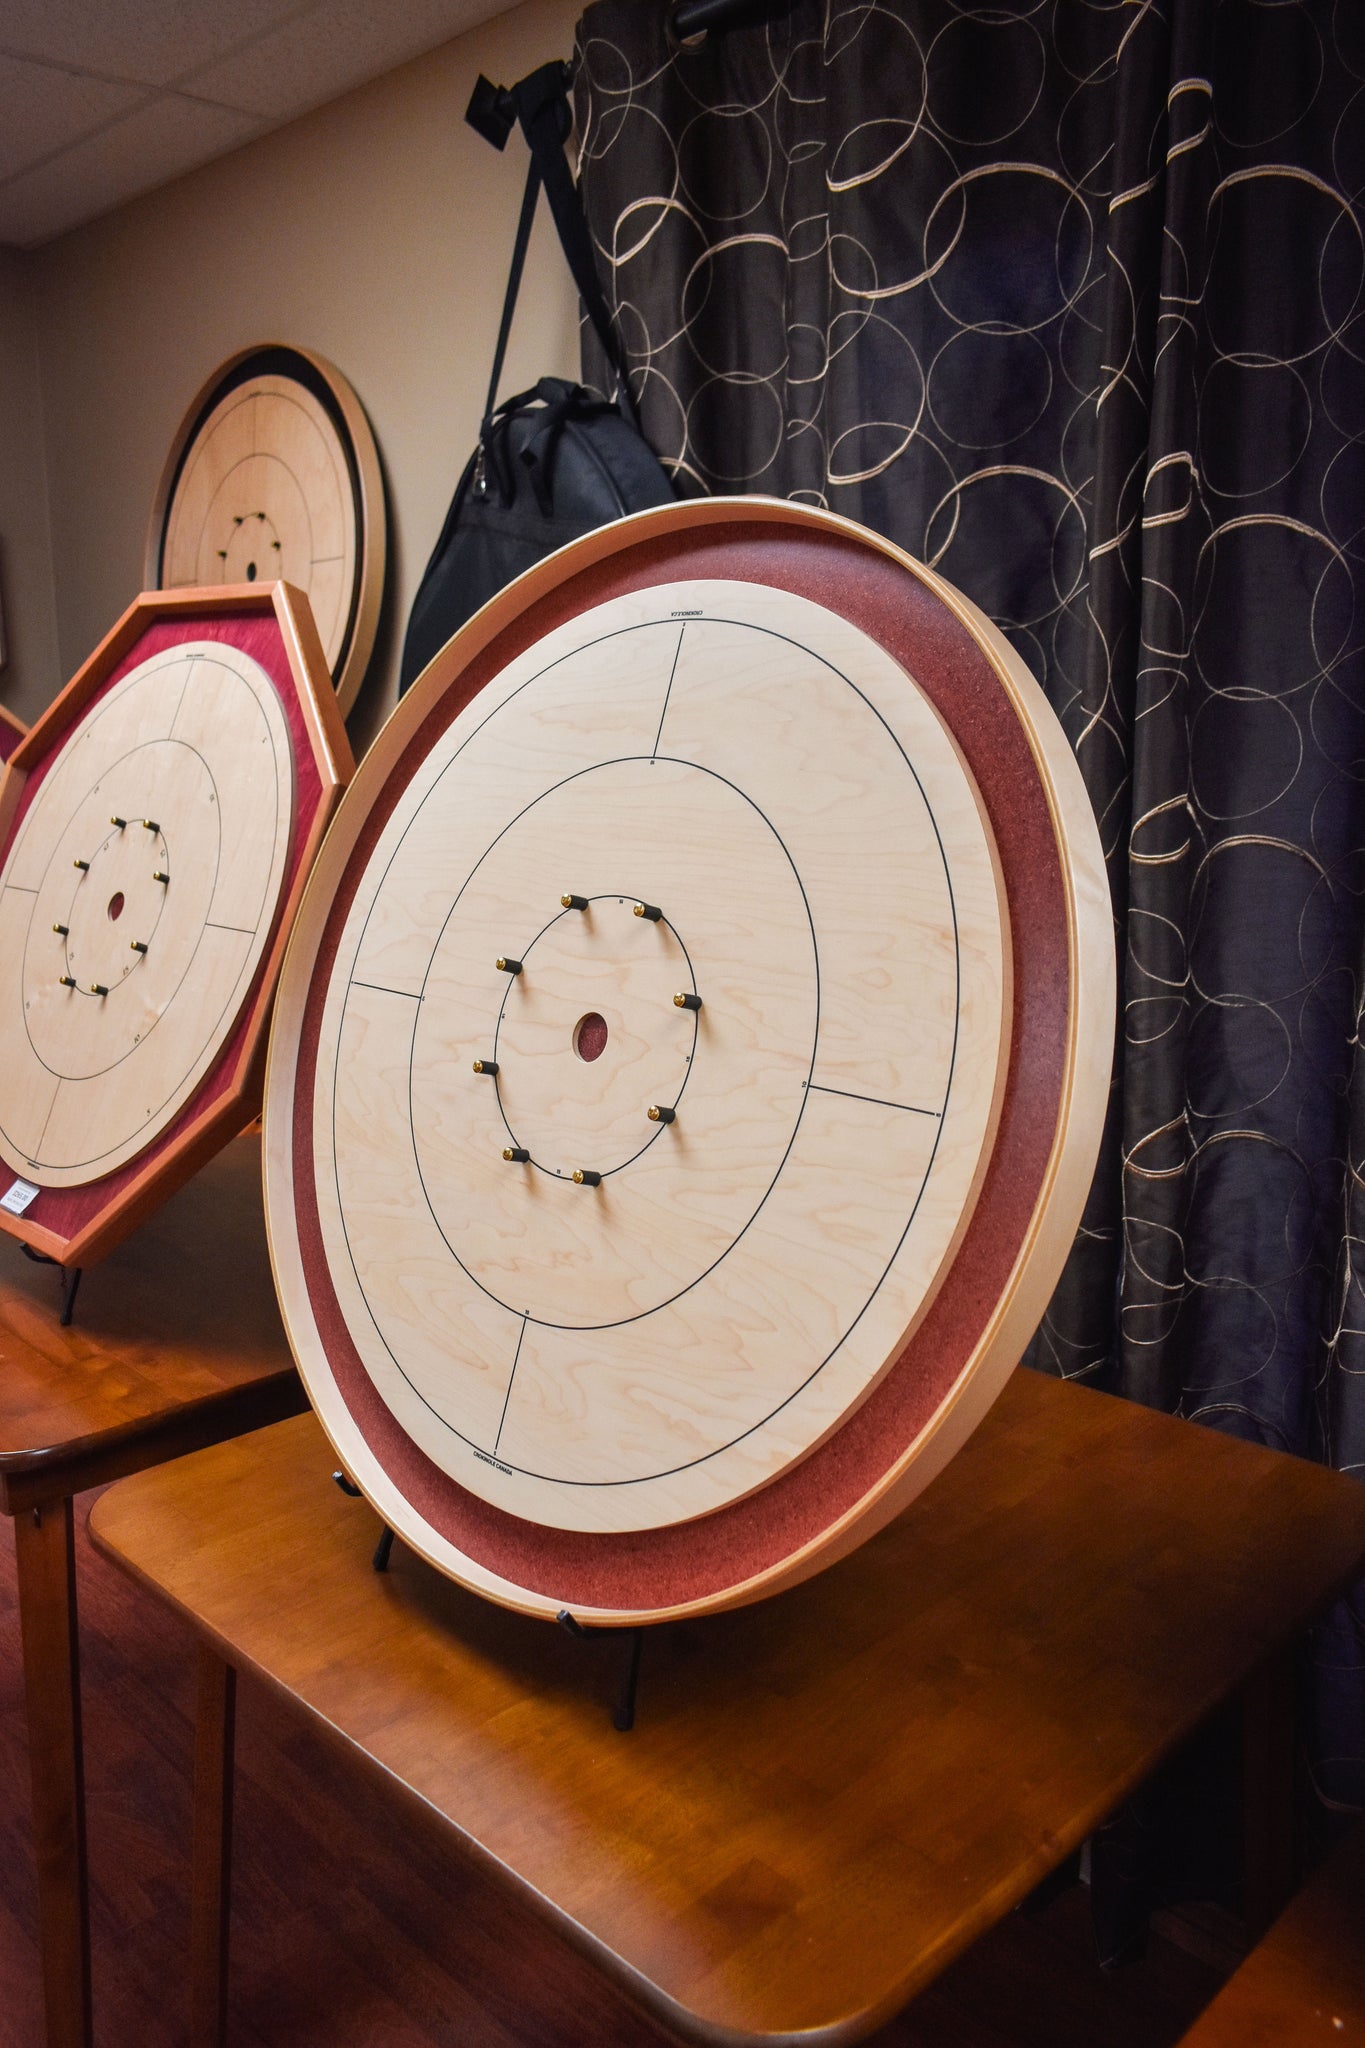 I made a Crokinole Board. Spent hours building it without ever